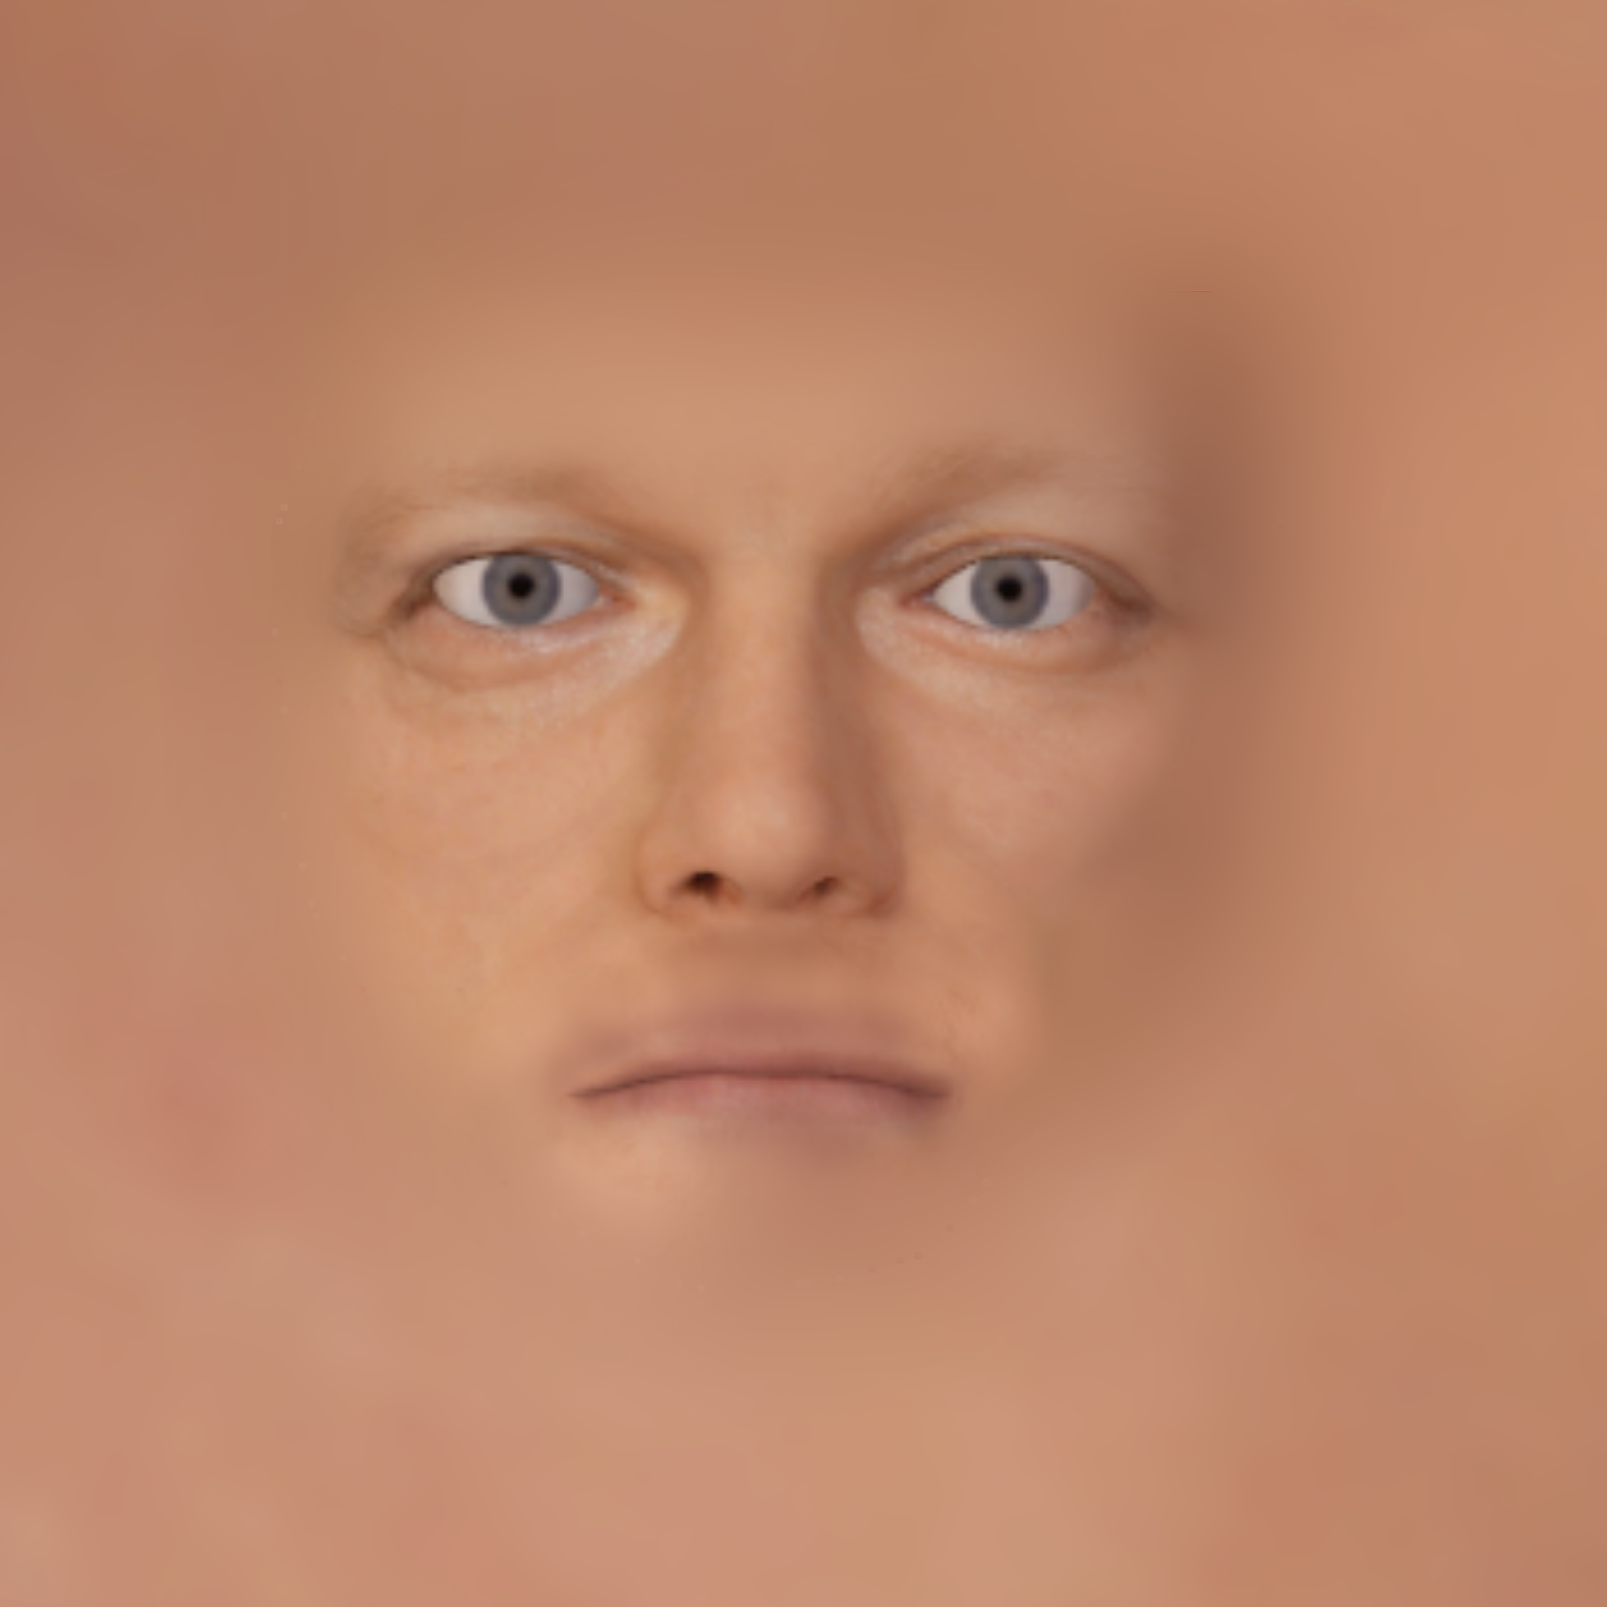 wwe-face-texture-paseedirect